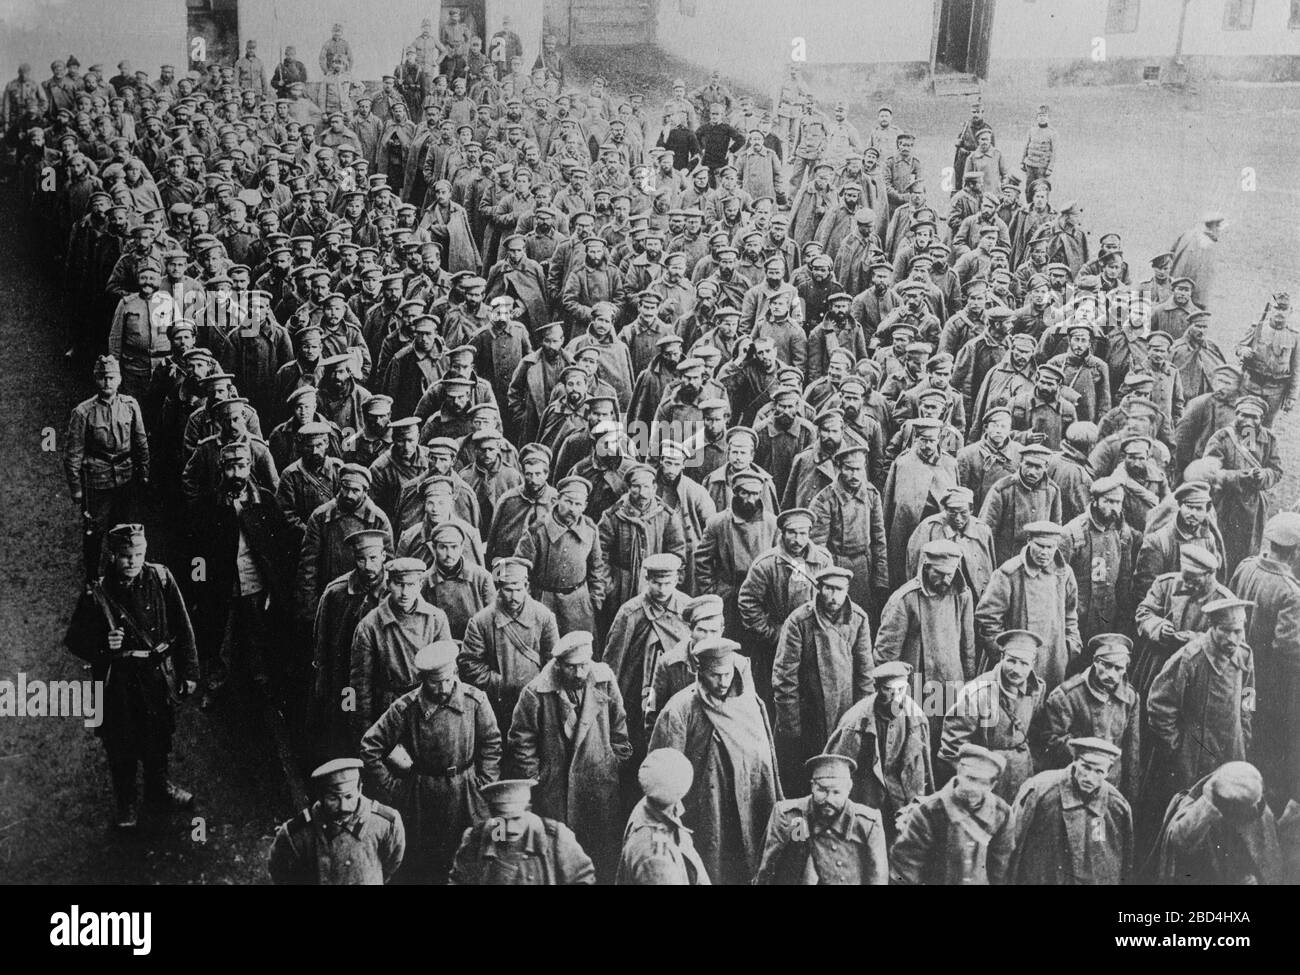 Russian soldiers taken prisoner by the Austro-Hungarian army at Przemysl Fortress, Przemysl, Austro-Hungarian Empire (now in Poland) during World War I ca. 1914-1915 Stock Photo